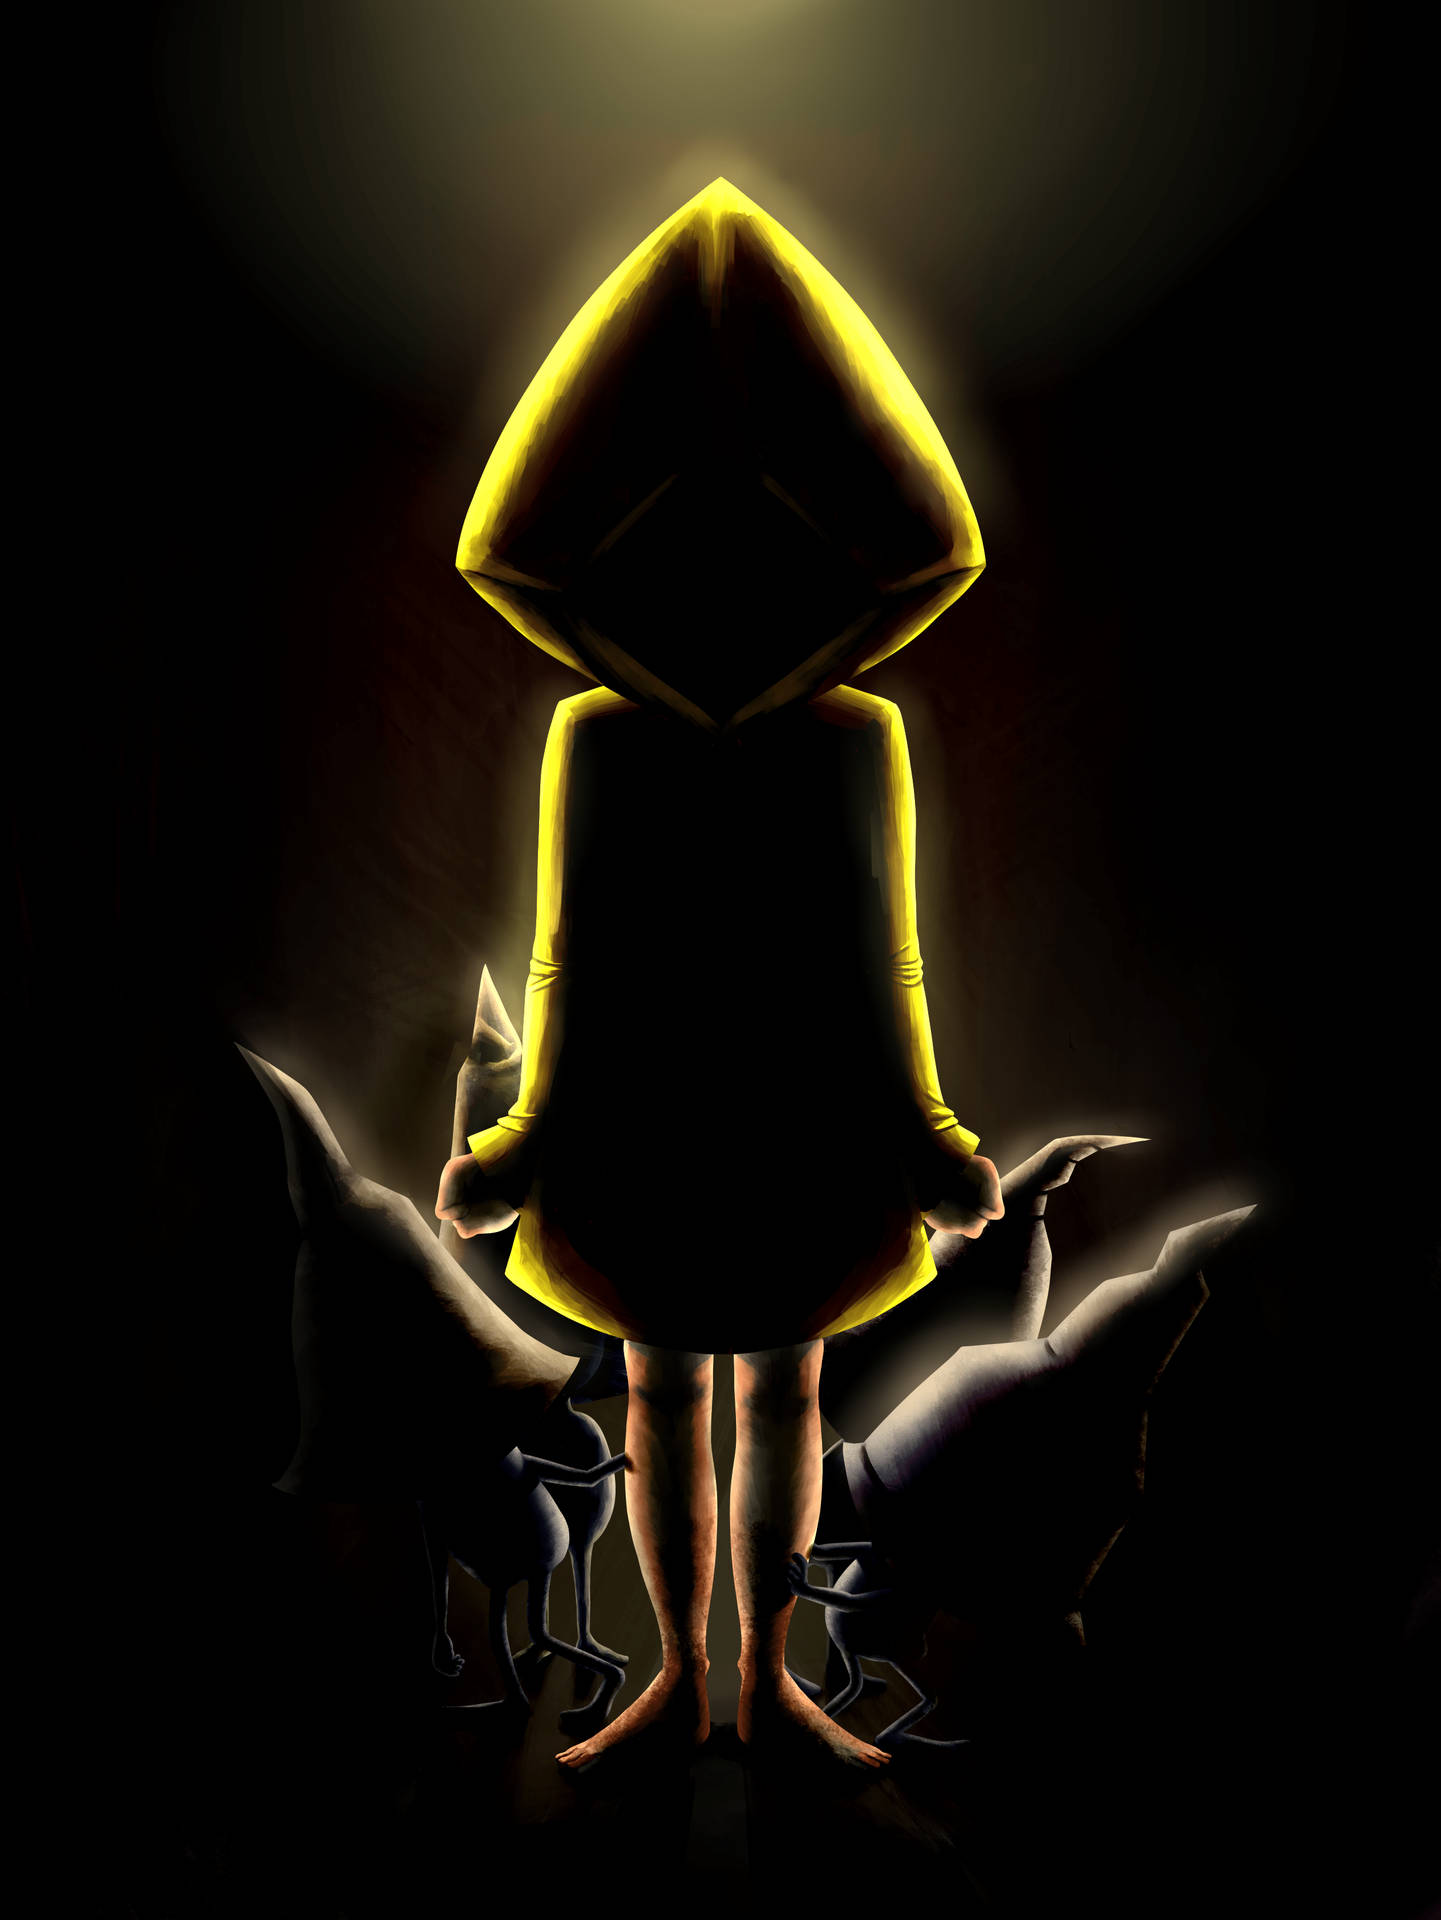 Little Nightmares 2526X3366 Wallpaper and Background Image